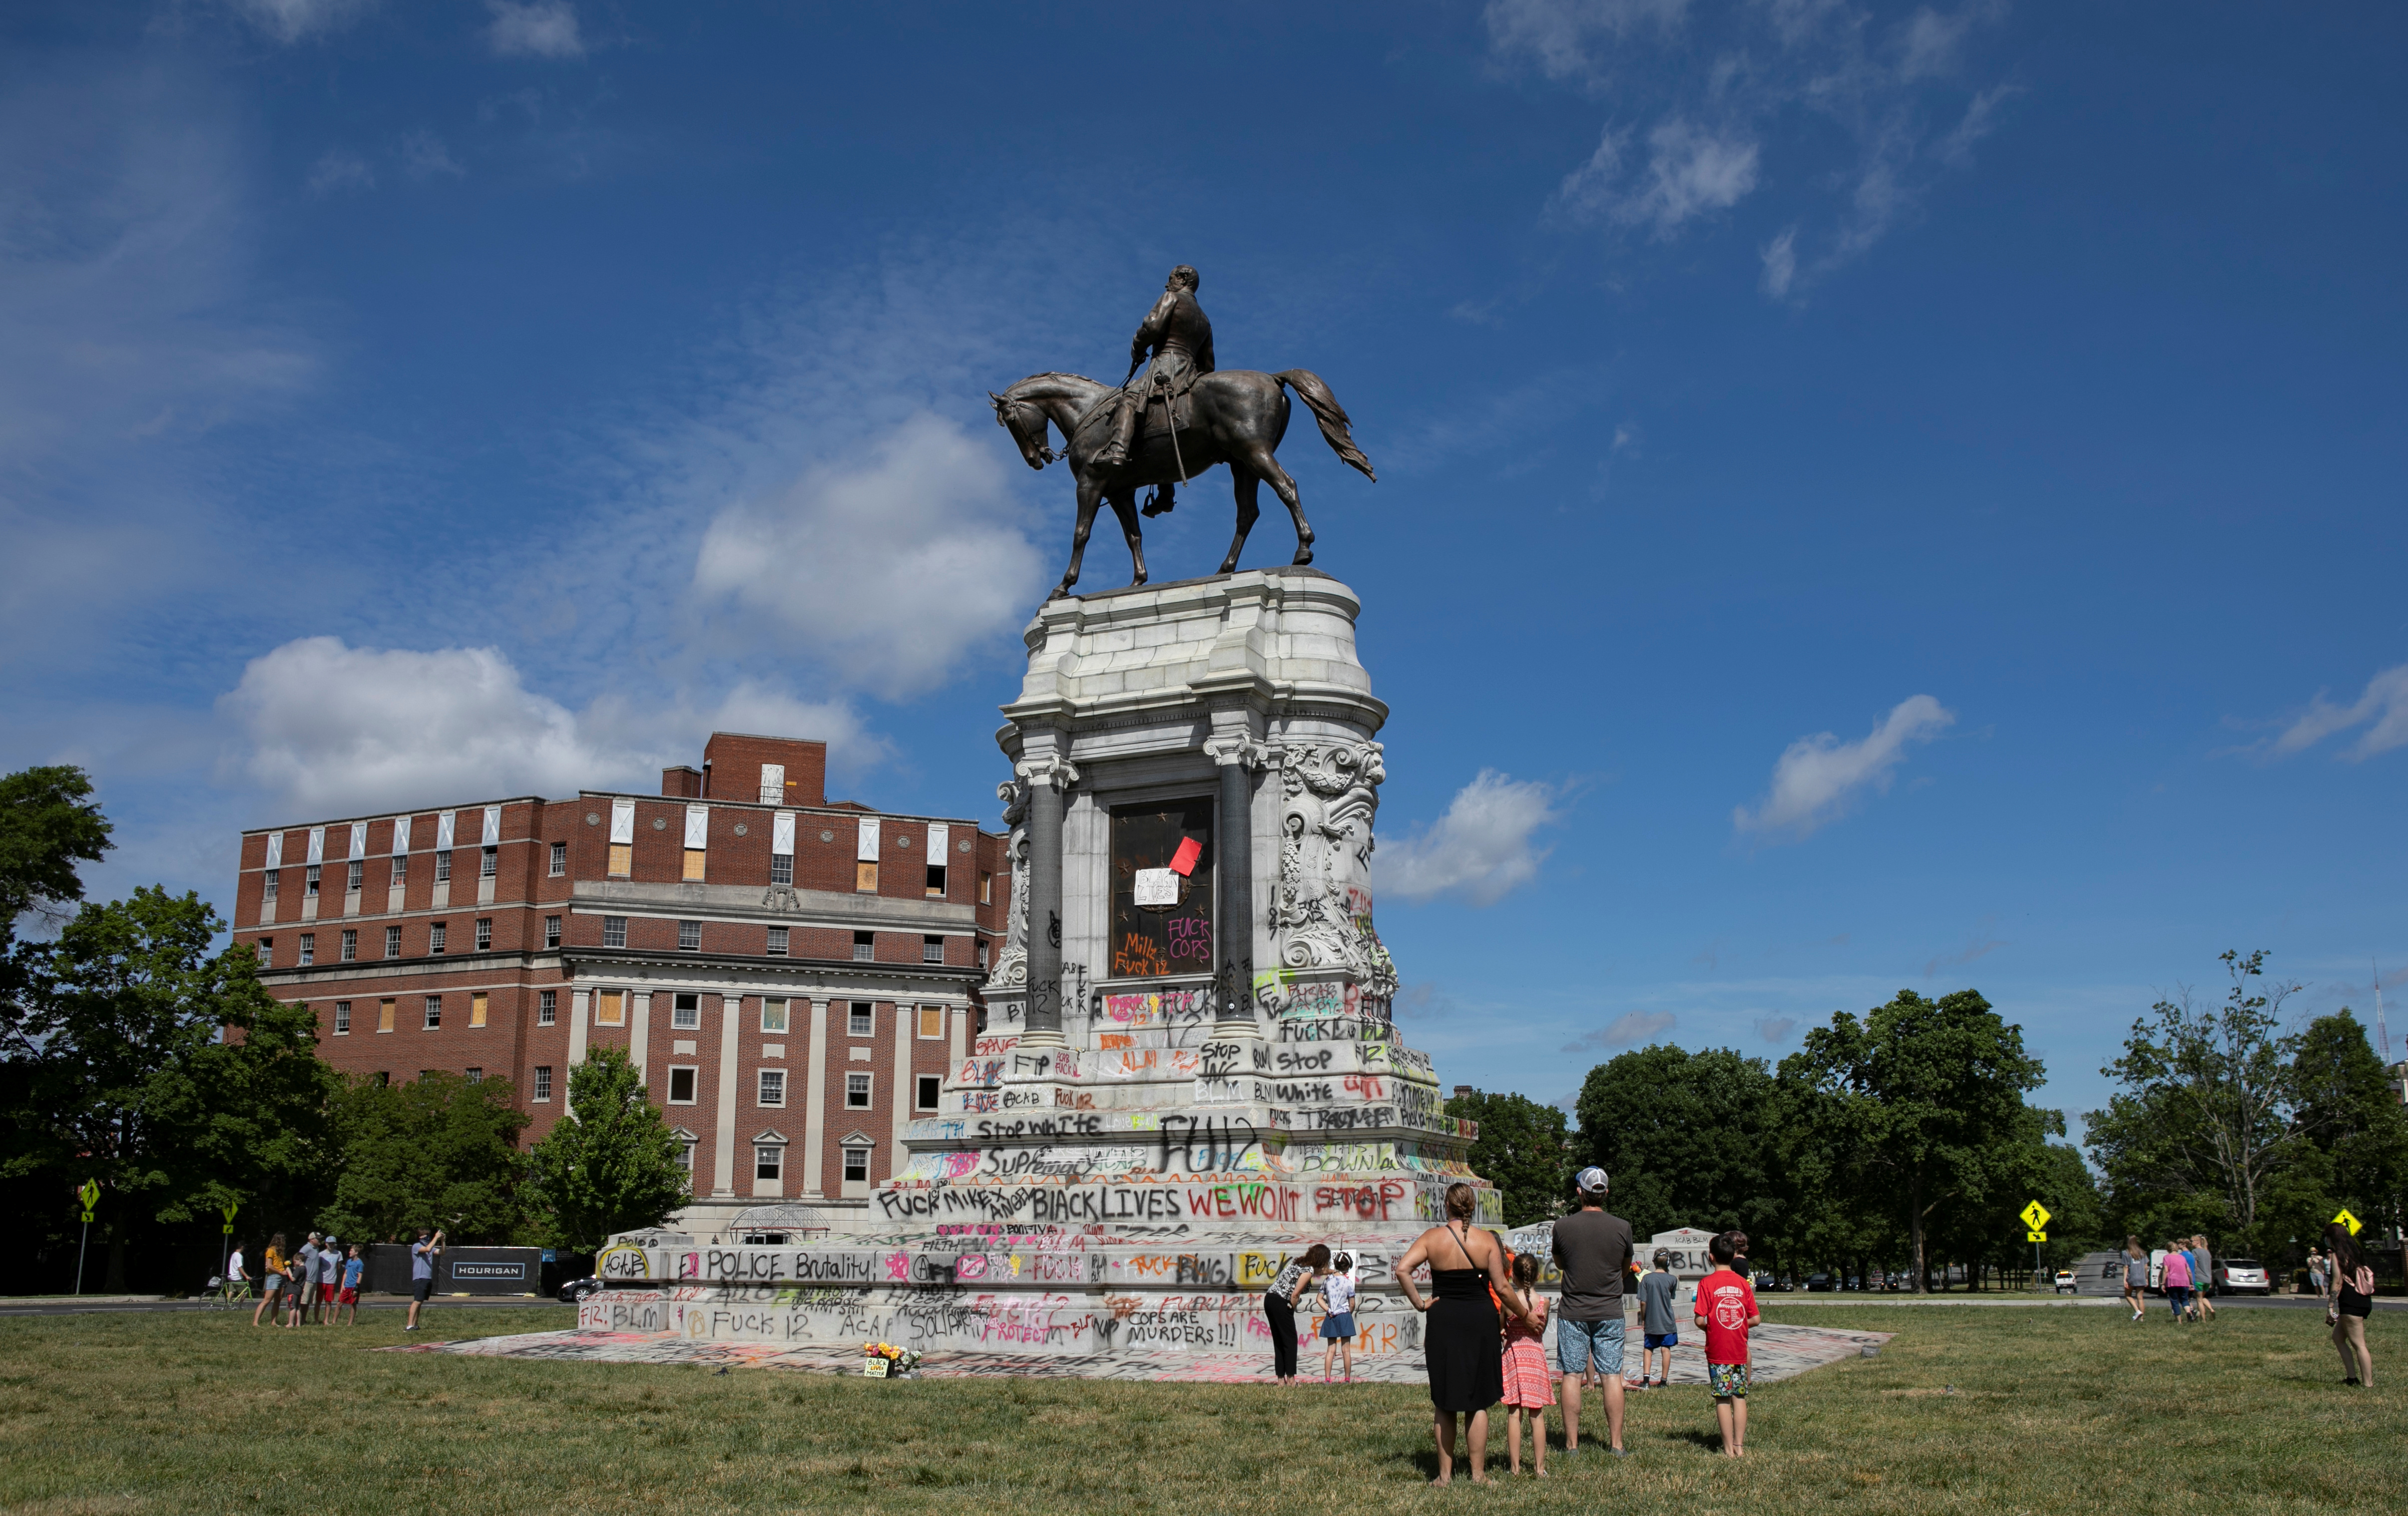 SENSITIVE MATERIAL. People visit a monument of Confederate general Robert E. Lee after Virginia Governor Ralph Northam ordered its removal after widespread civil unrest following the death in Minneapolis police custody of George Floyd, in Richmond, Virginia, U.S. June 5, 2020. REUTERS/Julia Rendleman 